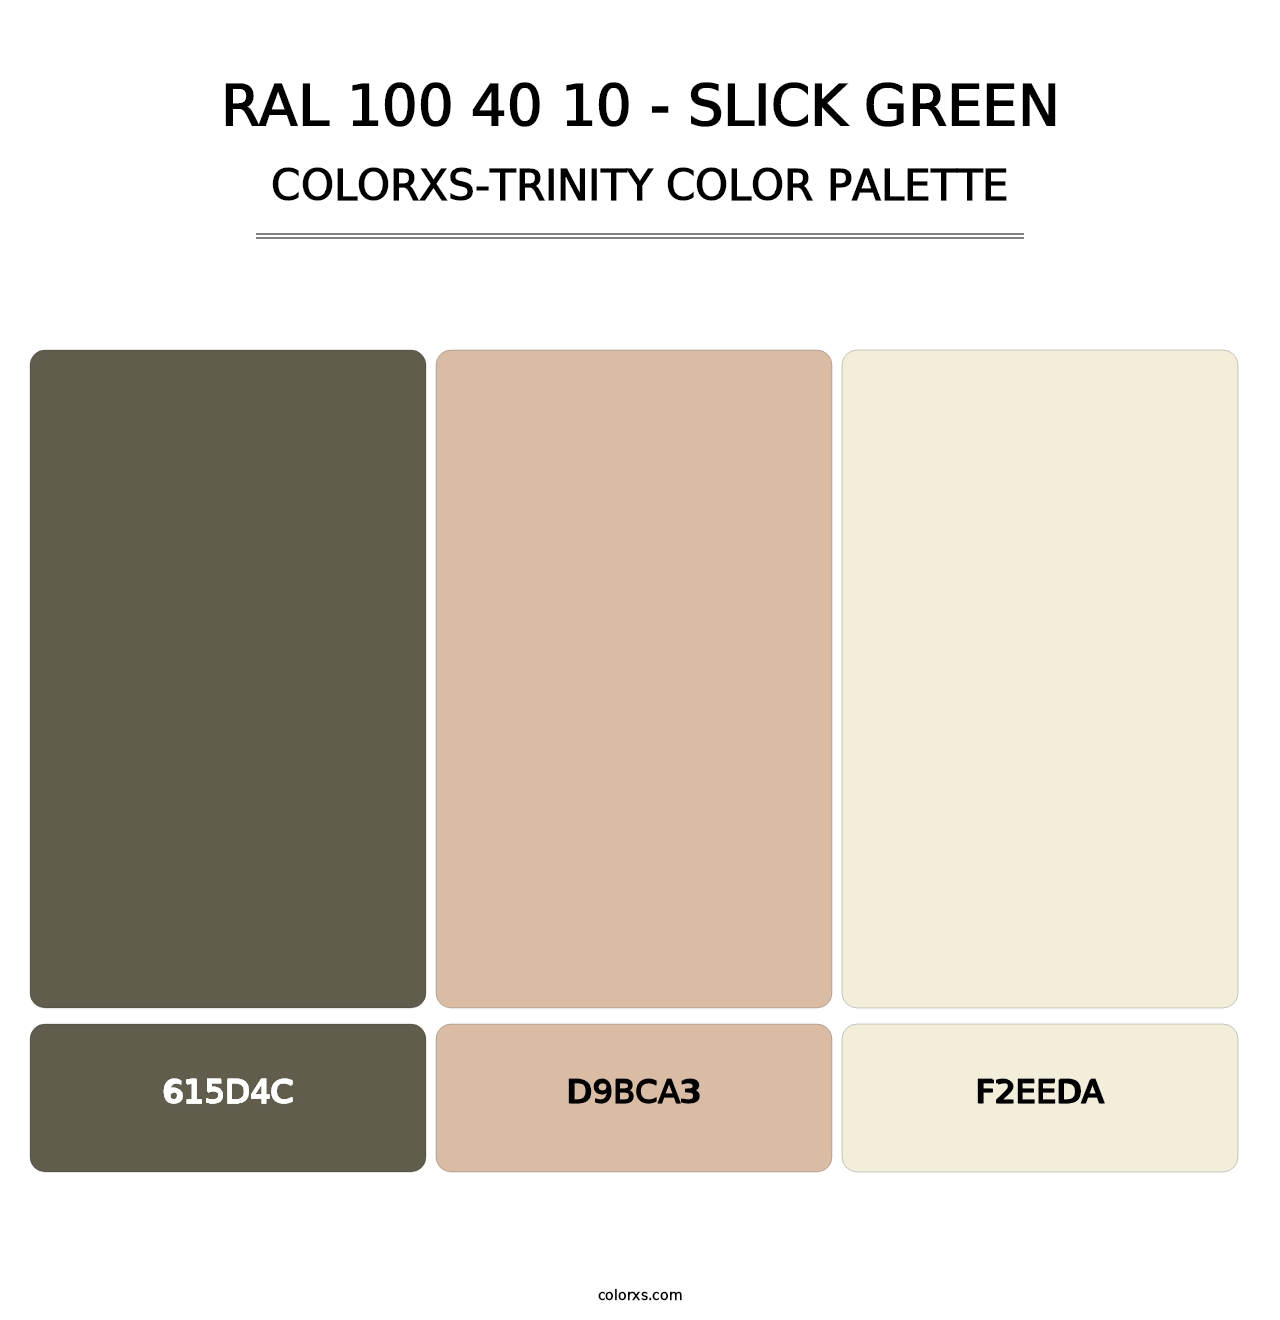 RAL 100 40 10 - Slick Green - Colorxs Trinity Palette